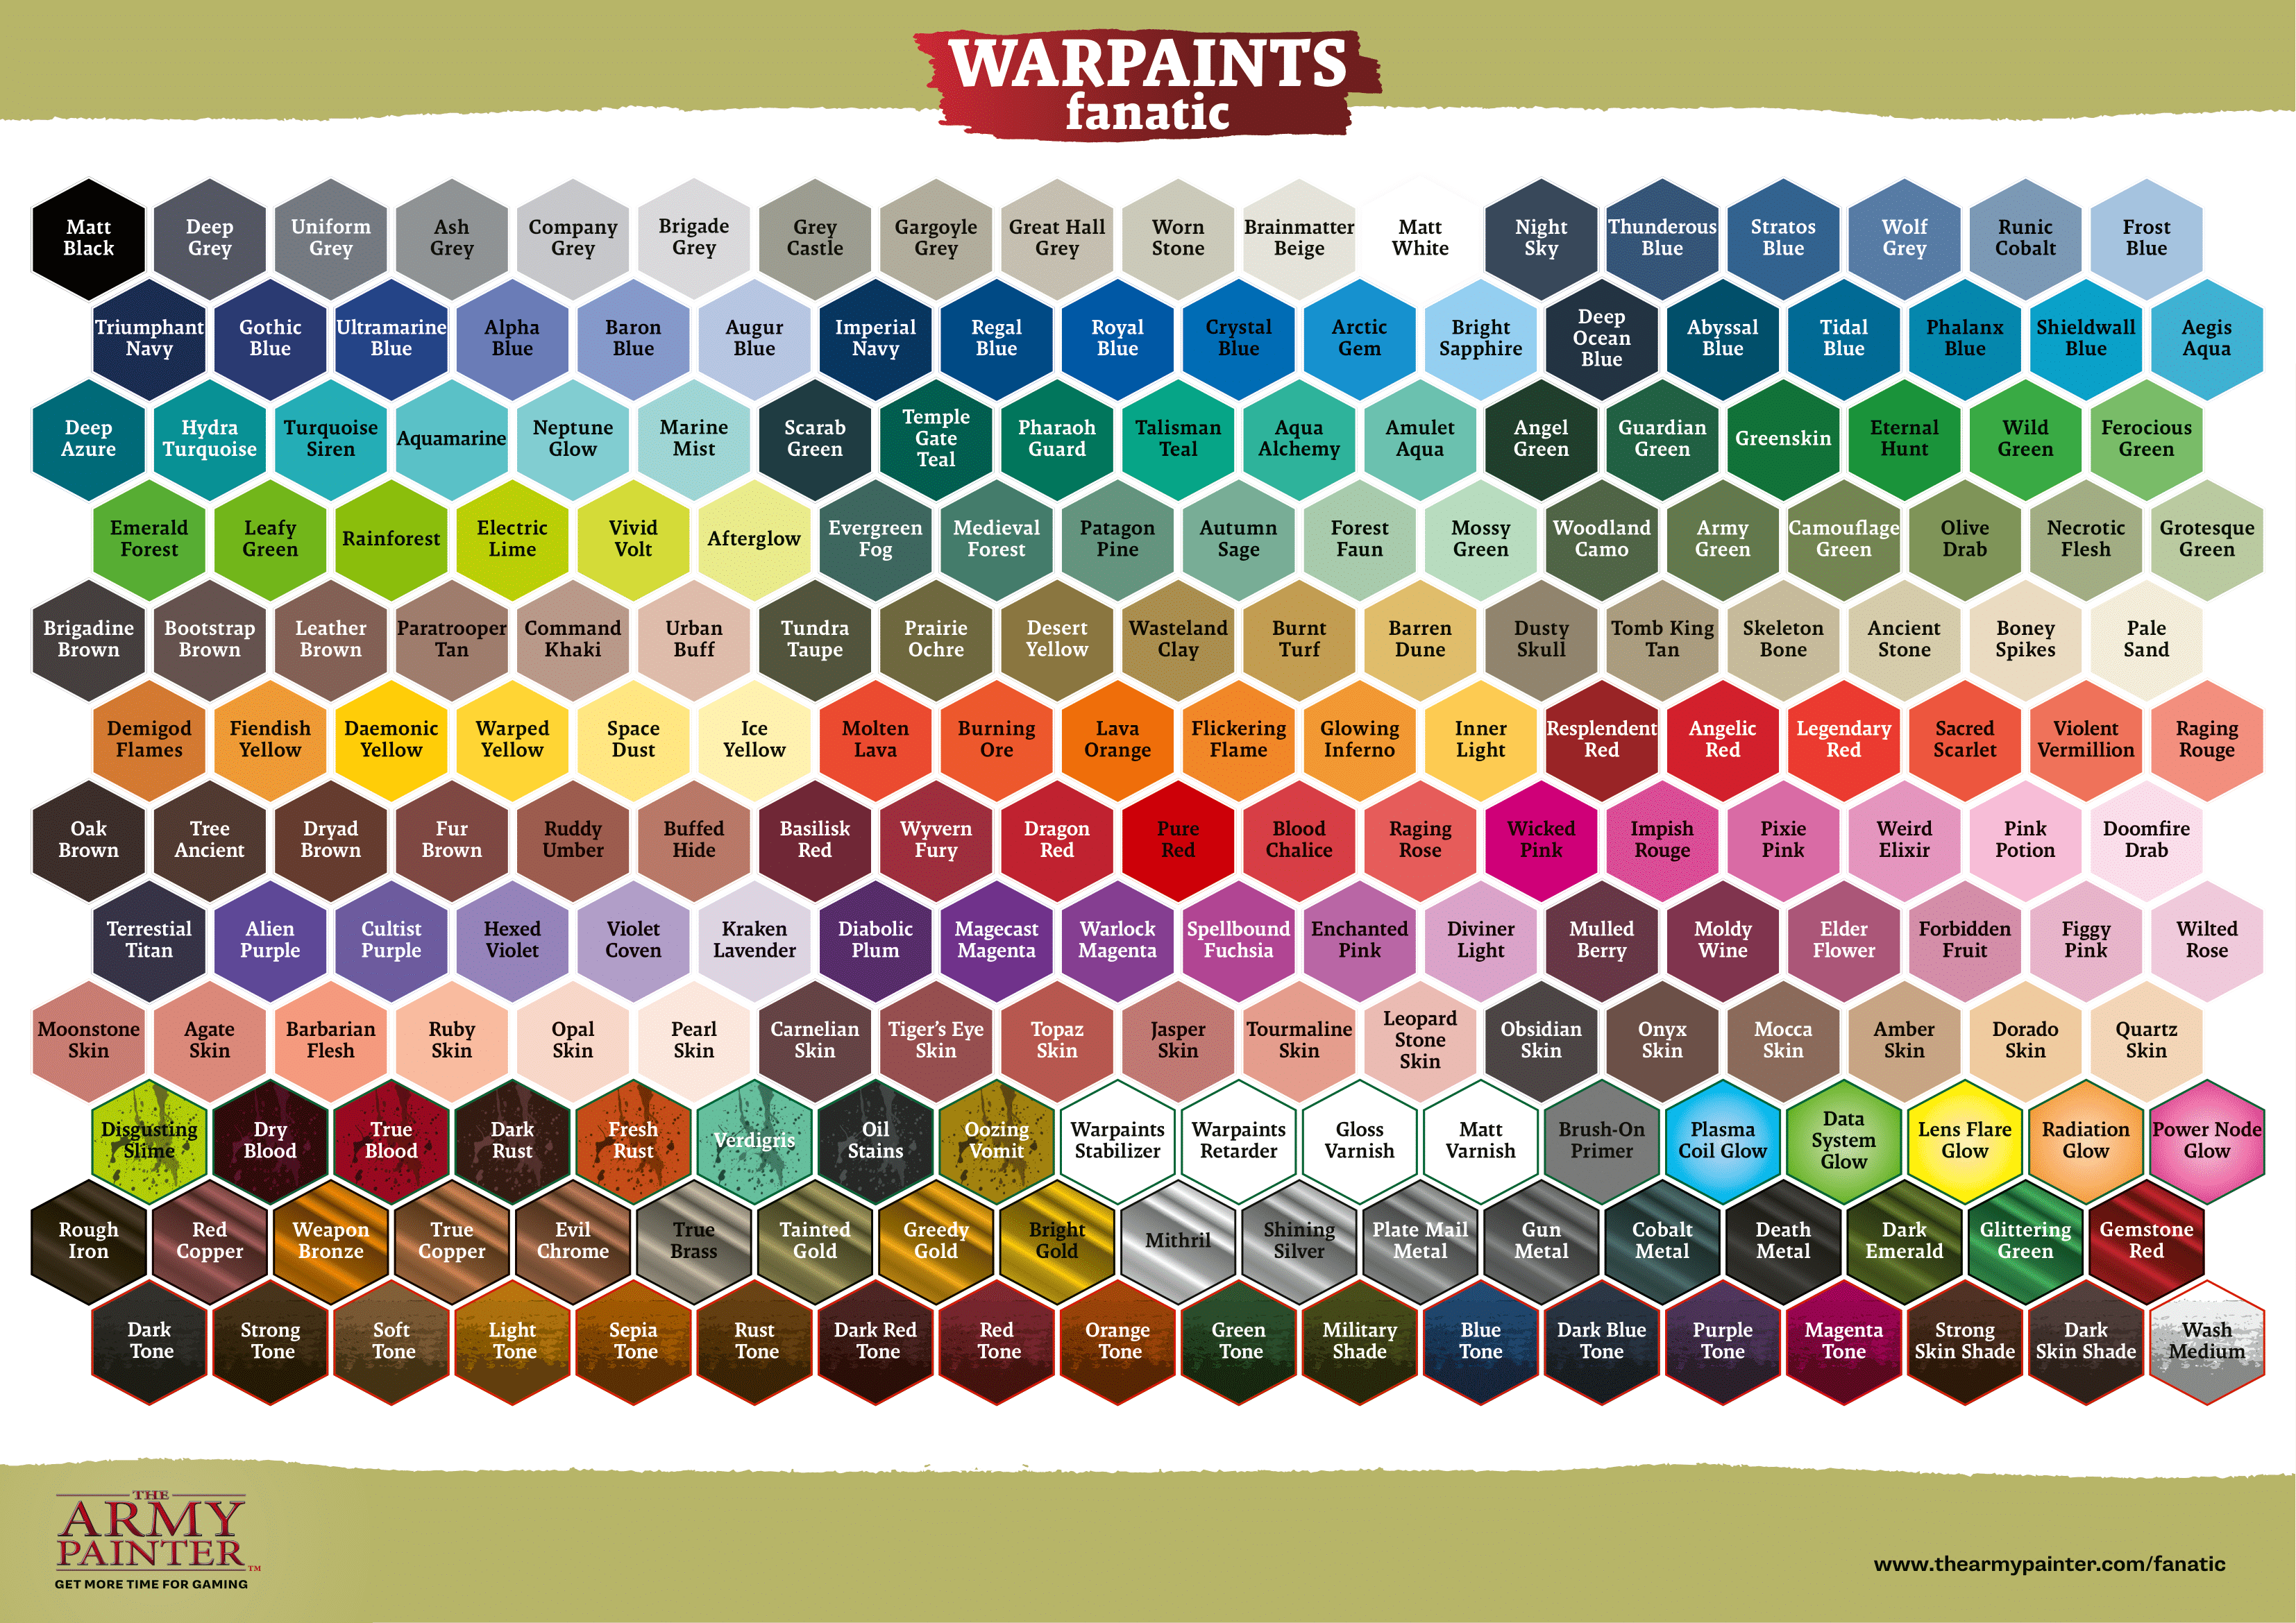 Army Painter Warpaints Fanatic Full Collection (WP3097 - WP3162 )